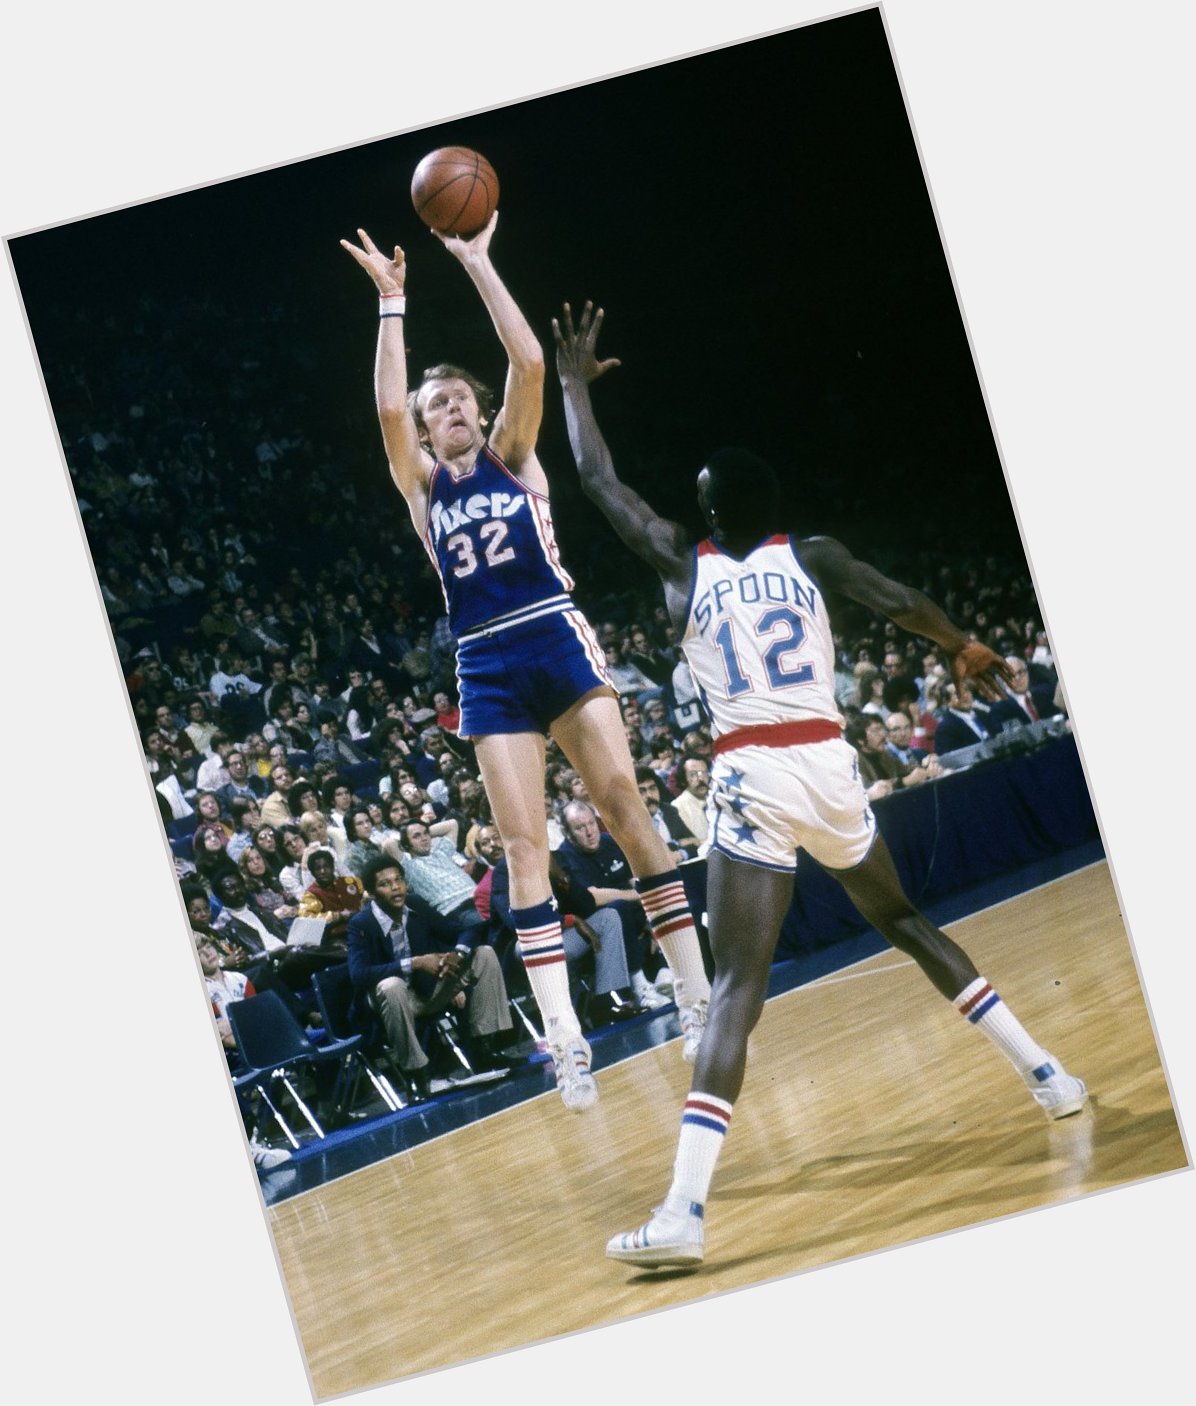 To wish Billy Cunningham a Happy Birthday.   : Focus on Sport/Getty Images 